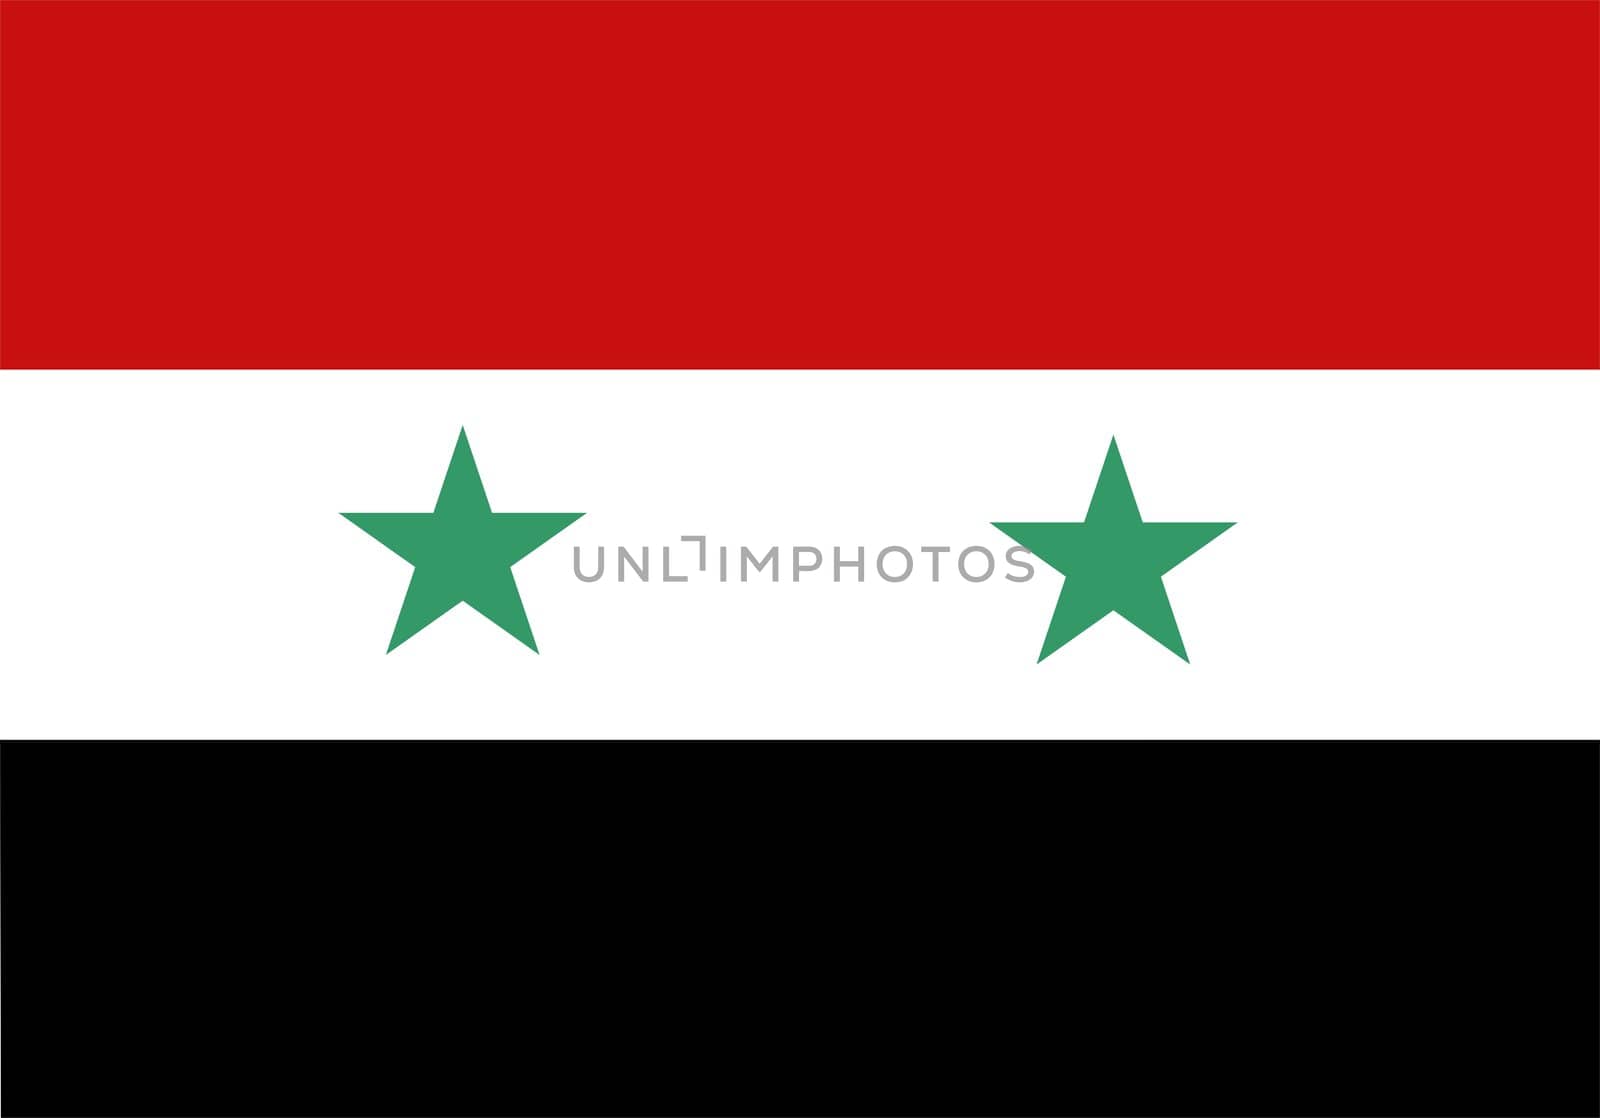 2D illustration of the flag of syria